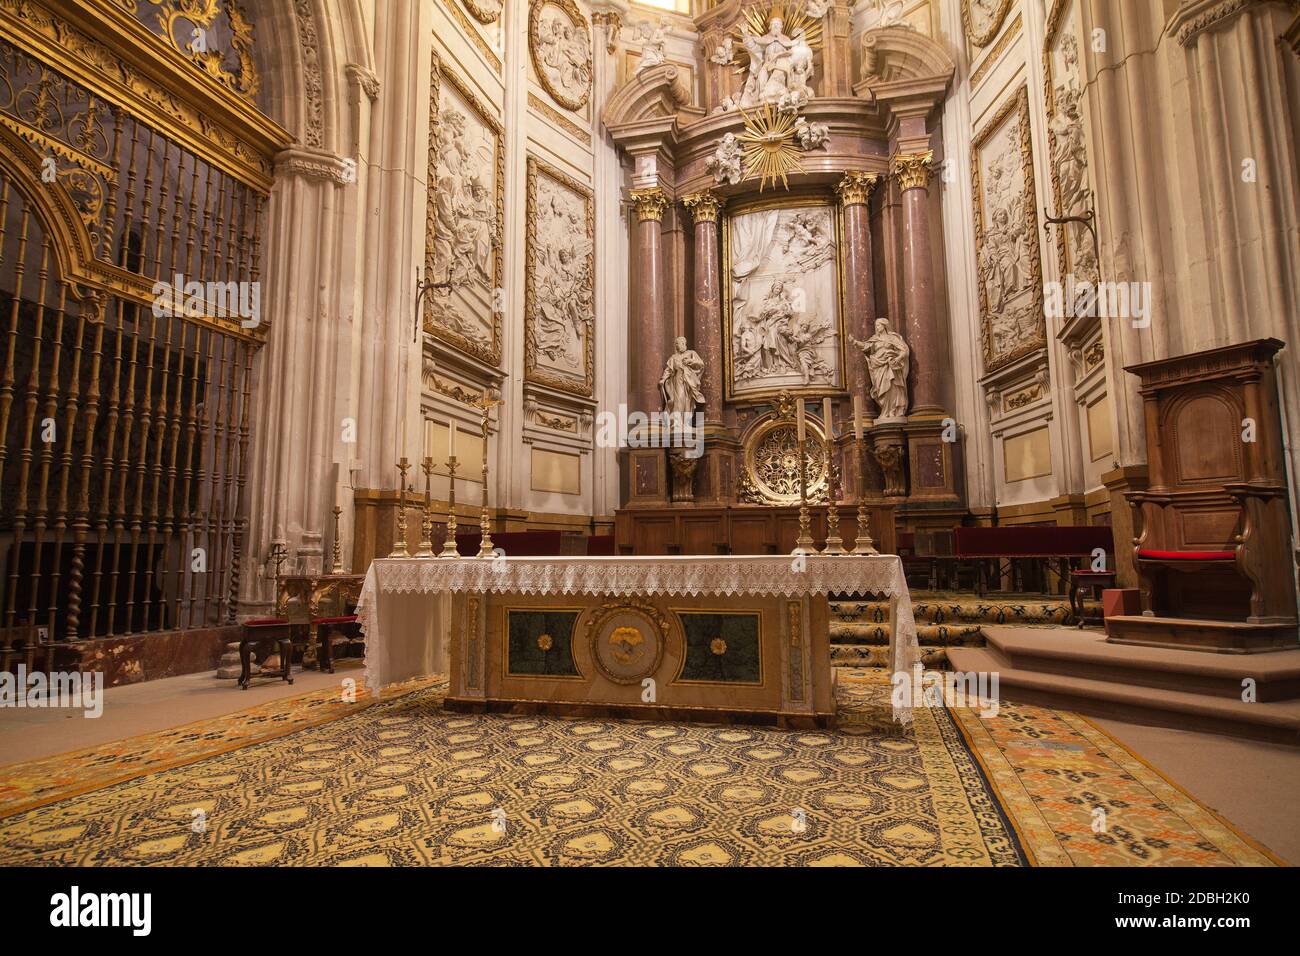 High Altar of the Cathedral of Santa Maria in Cuenca, Spain. Stock Photo